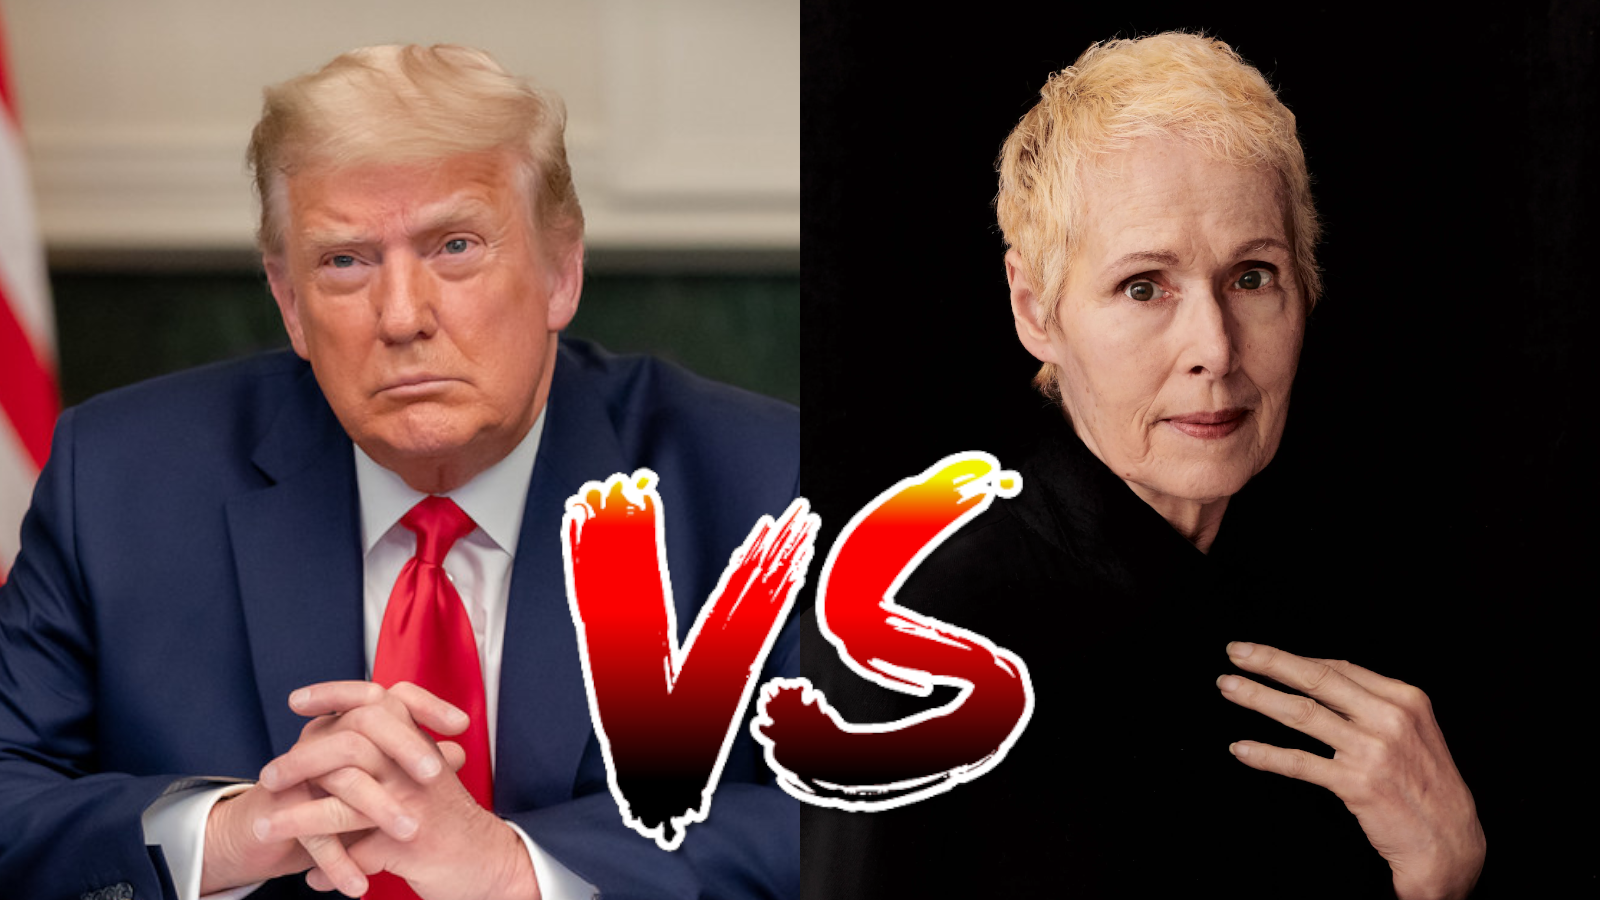 Trump Ordered to Pay $83.3 Million to E. Jean Carroll